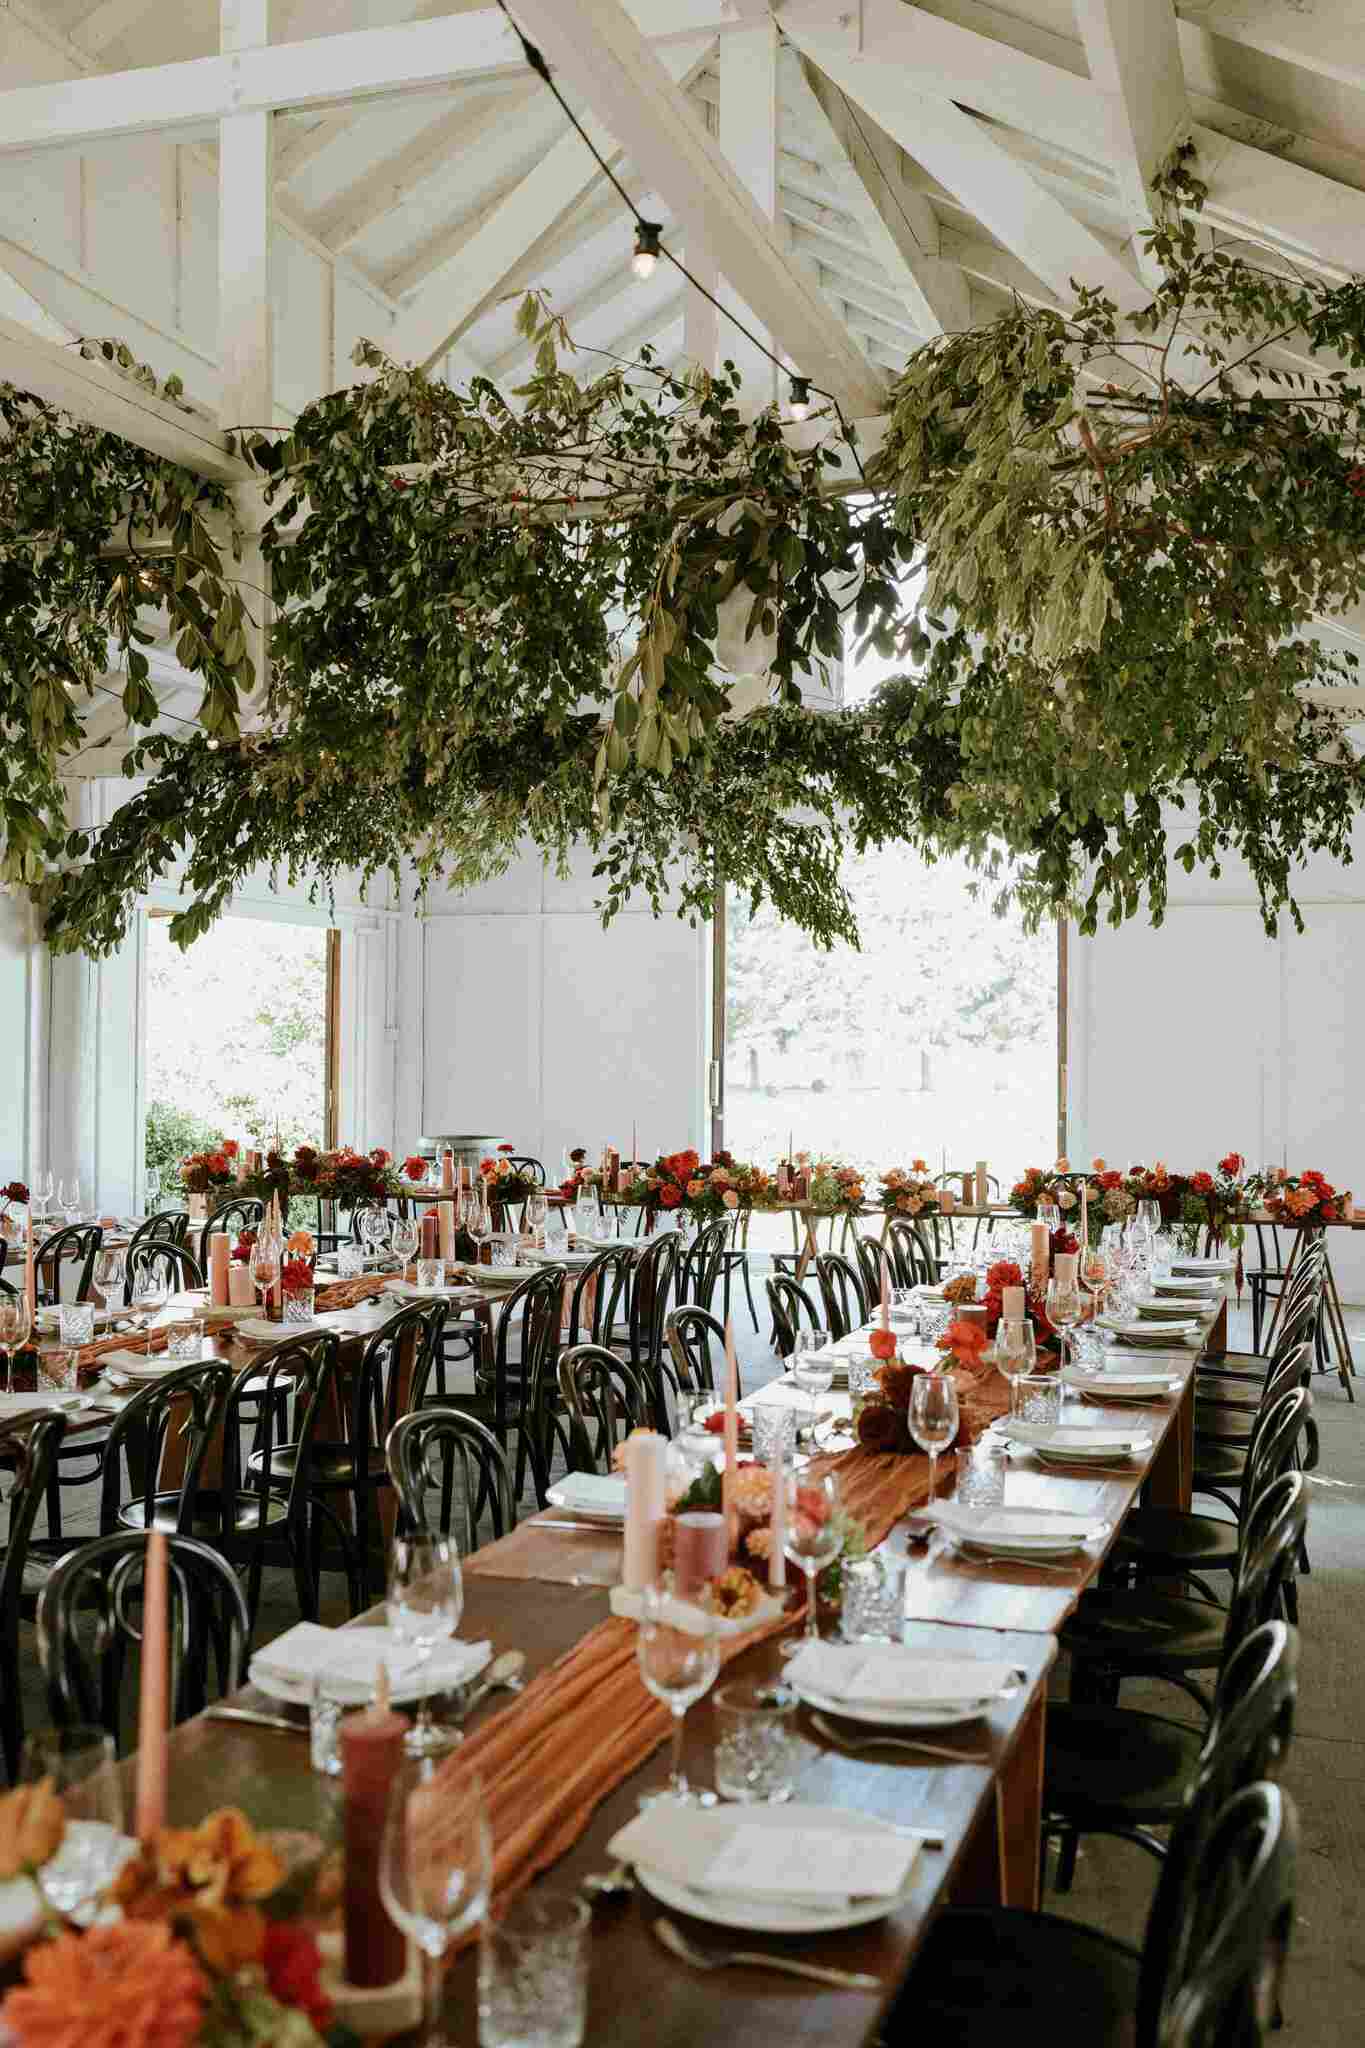 Bonnie and Taylor's wedding reception with long table decorated with garden greens